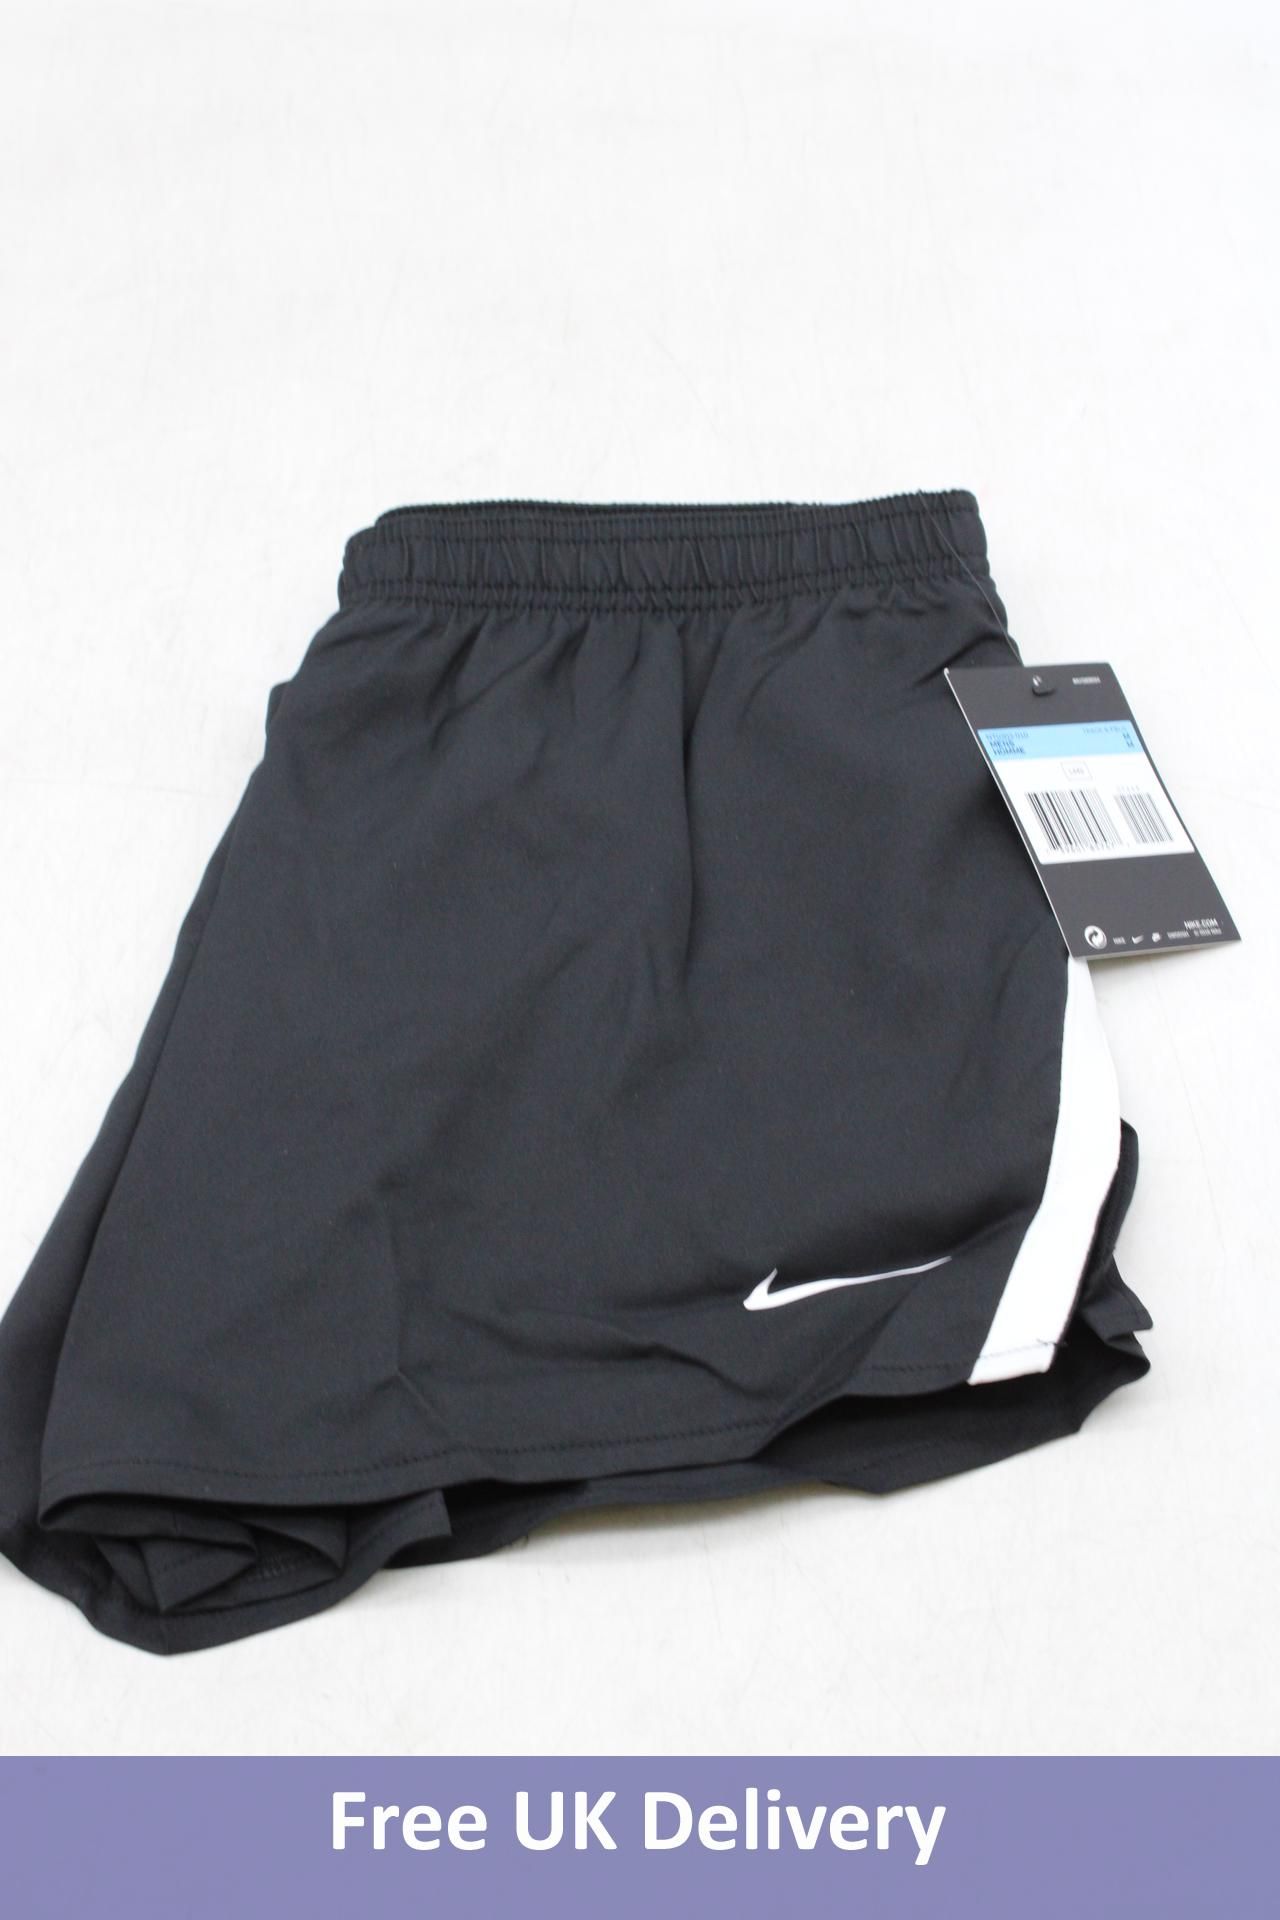 Five Pairs of Nike Track & Field 2" Running Shorts, Black, Small